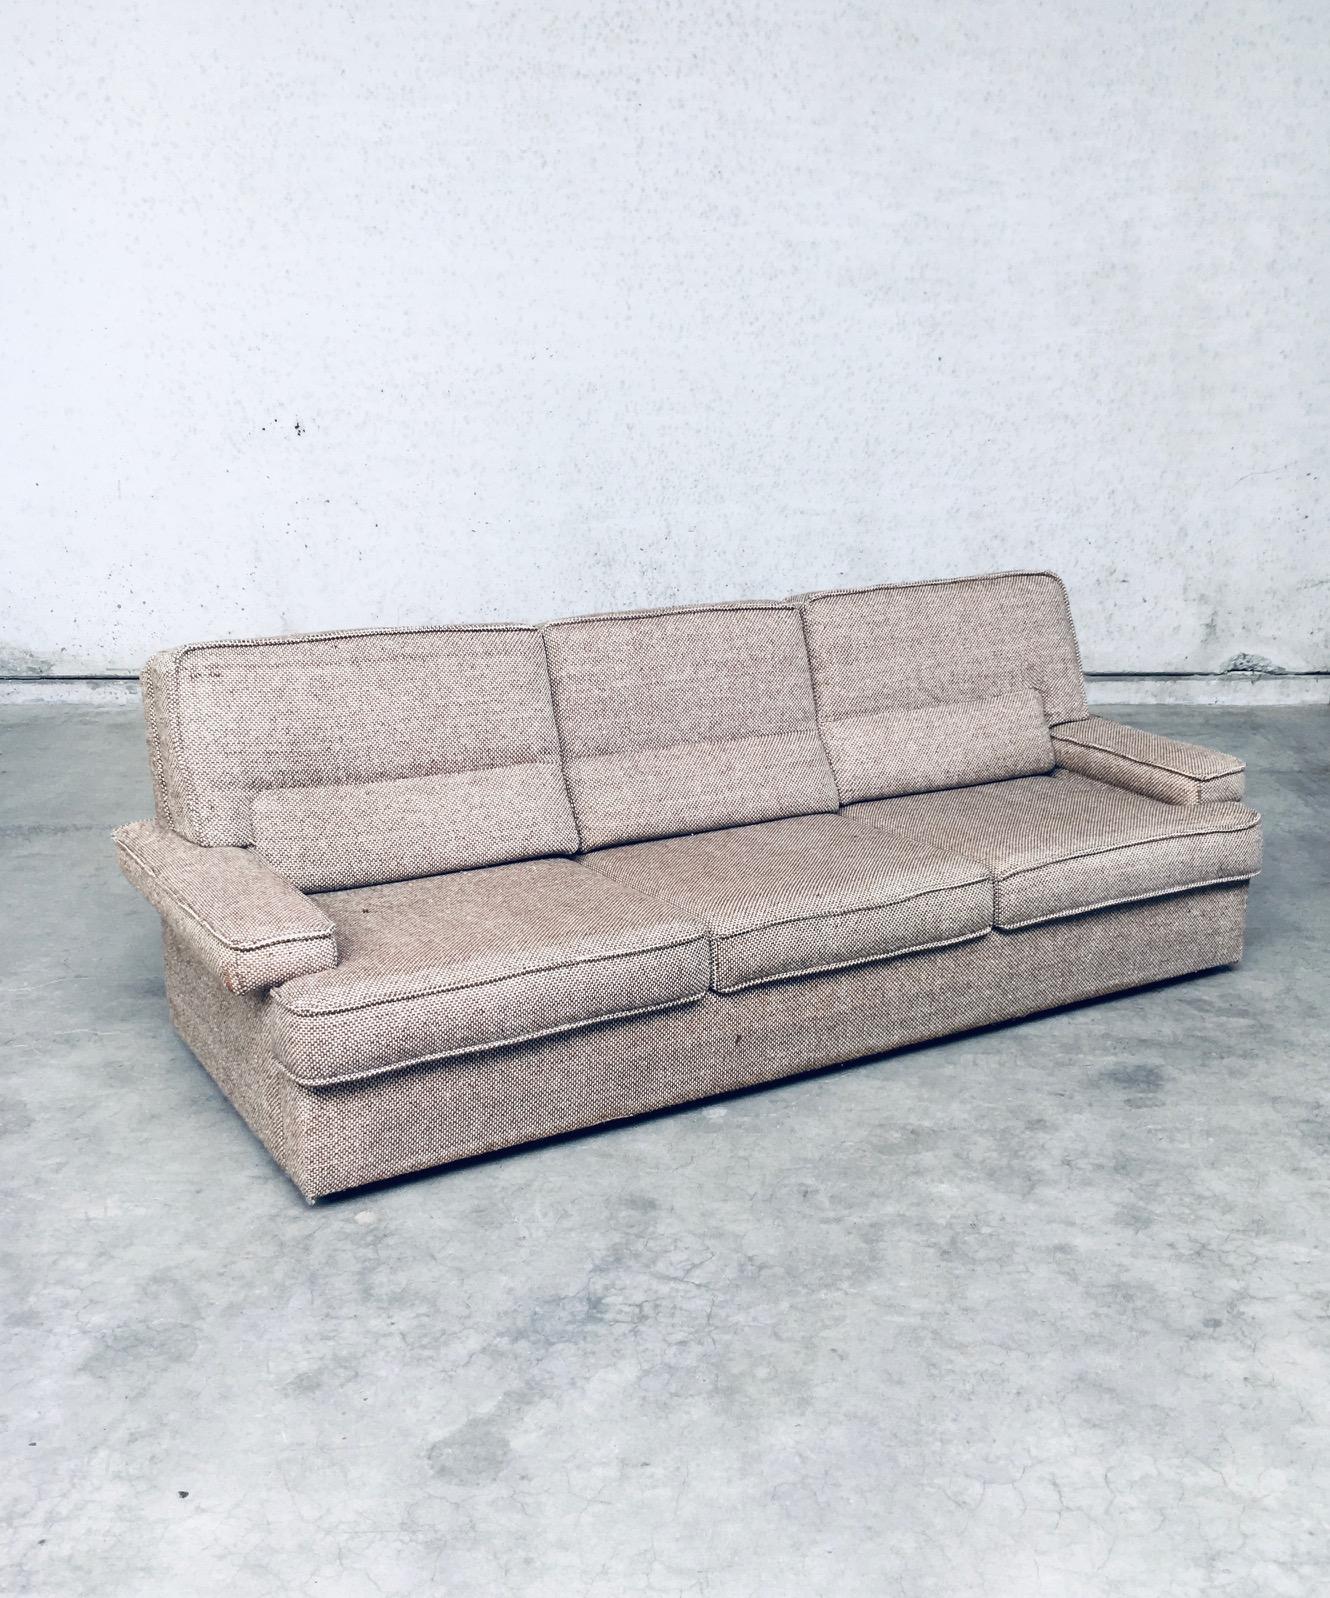 Vintage Midcentury Modern Italian Design 3 Seat Sofa. Made in Italy, 1970's period. Has a brand logo on the inside of the cushions and back. Brown / Beige Boucle wool woven fabric that comes in very clean and good condition. It's all original. Nice